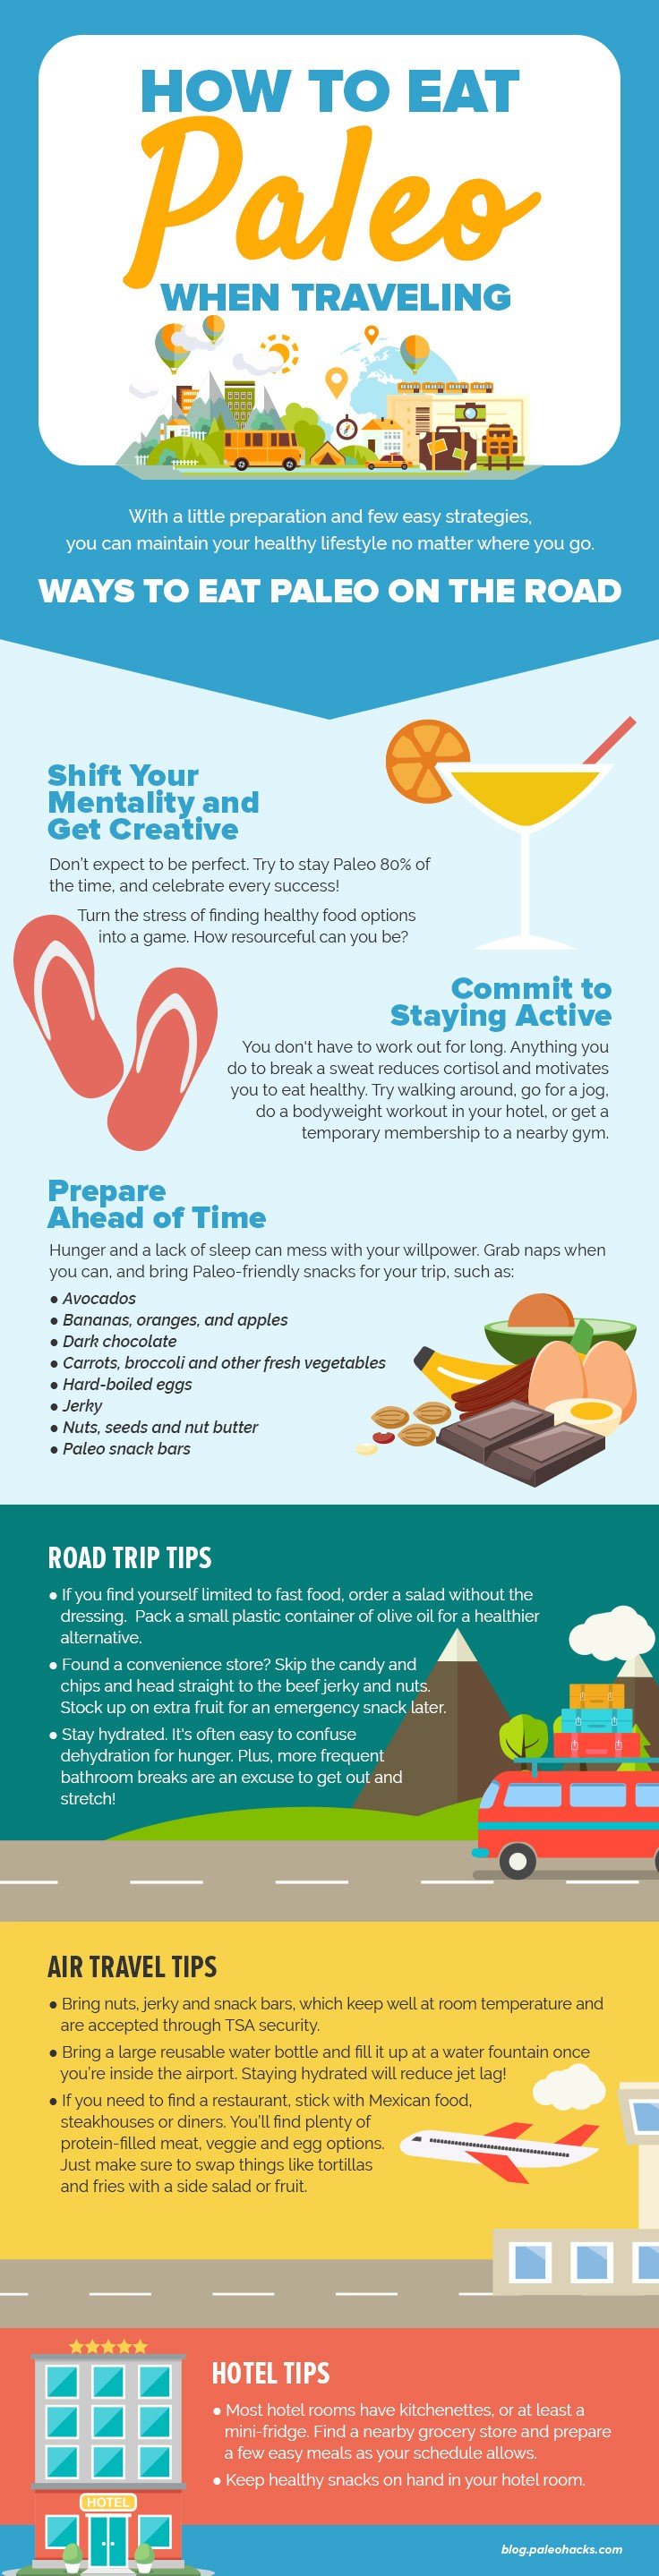 Healthy Travel Tips